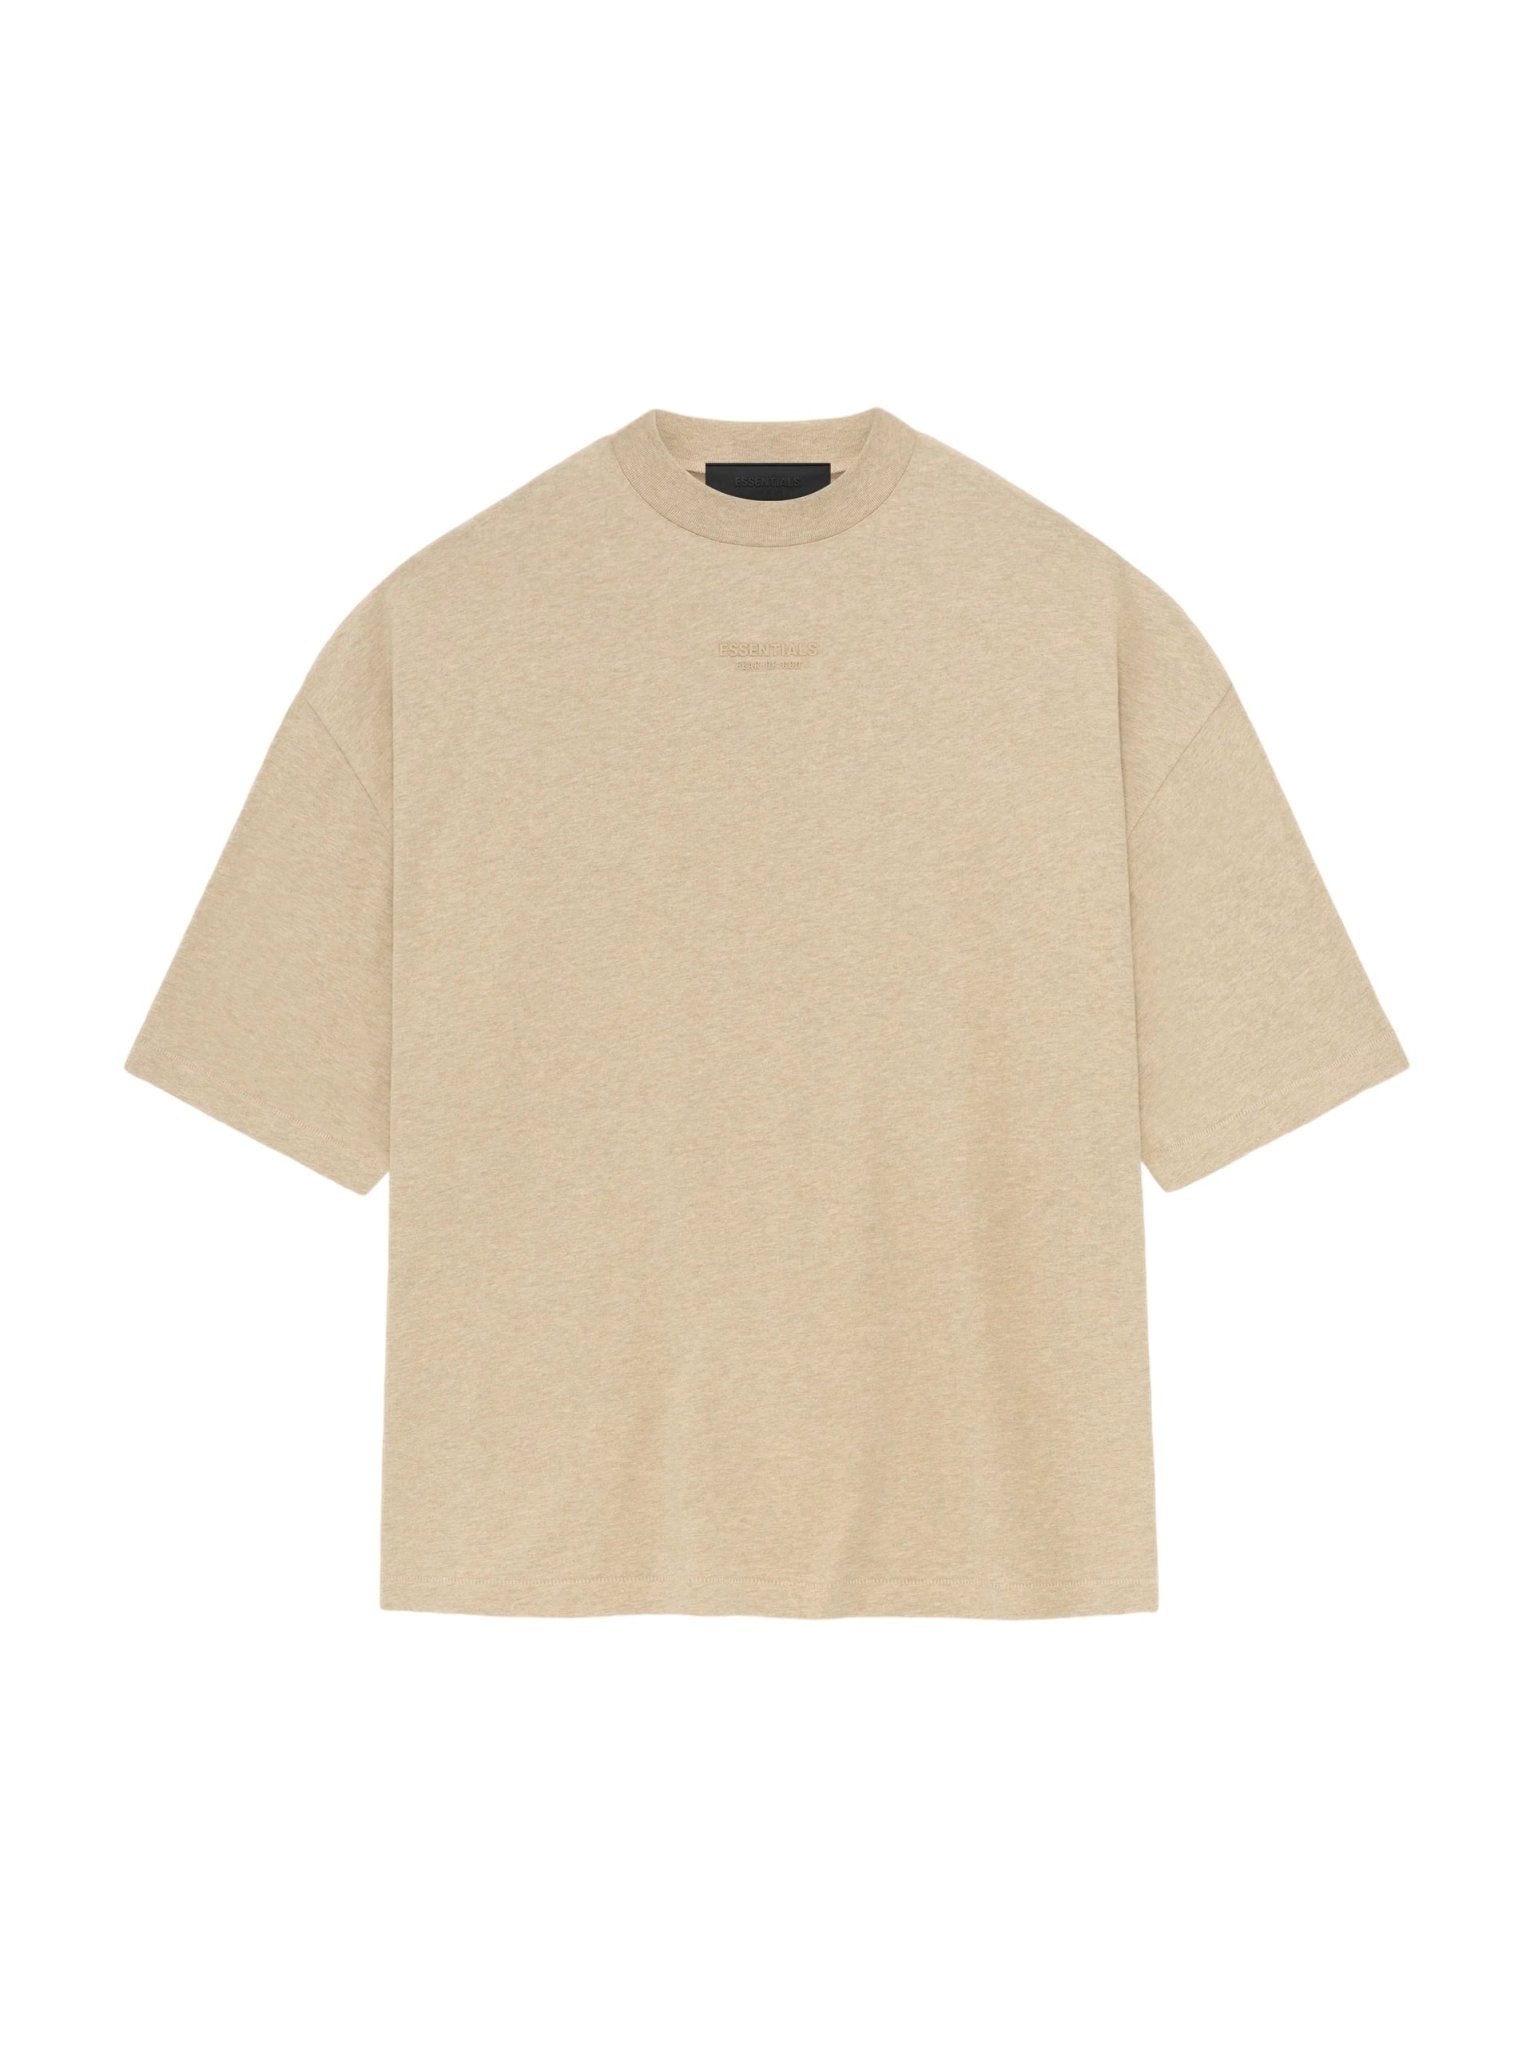 Fear of God Essentials T-shirt Gold Heather - Supra Master Sneakers